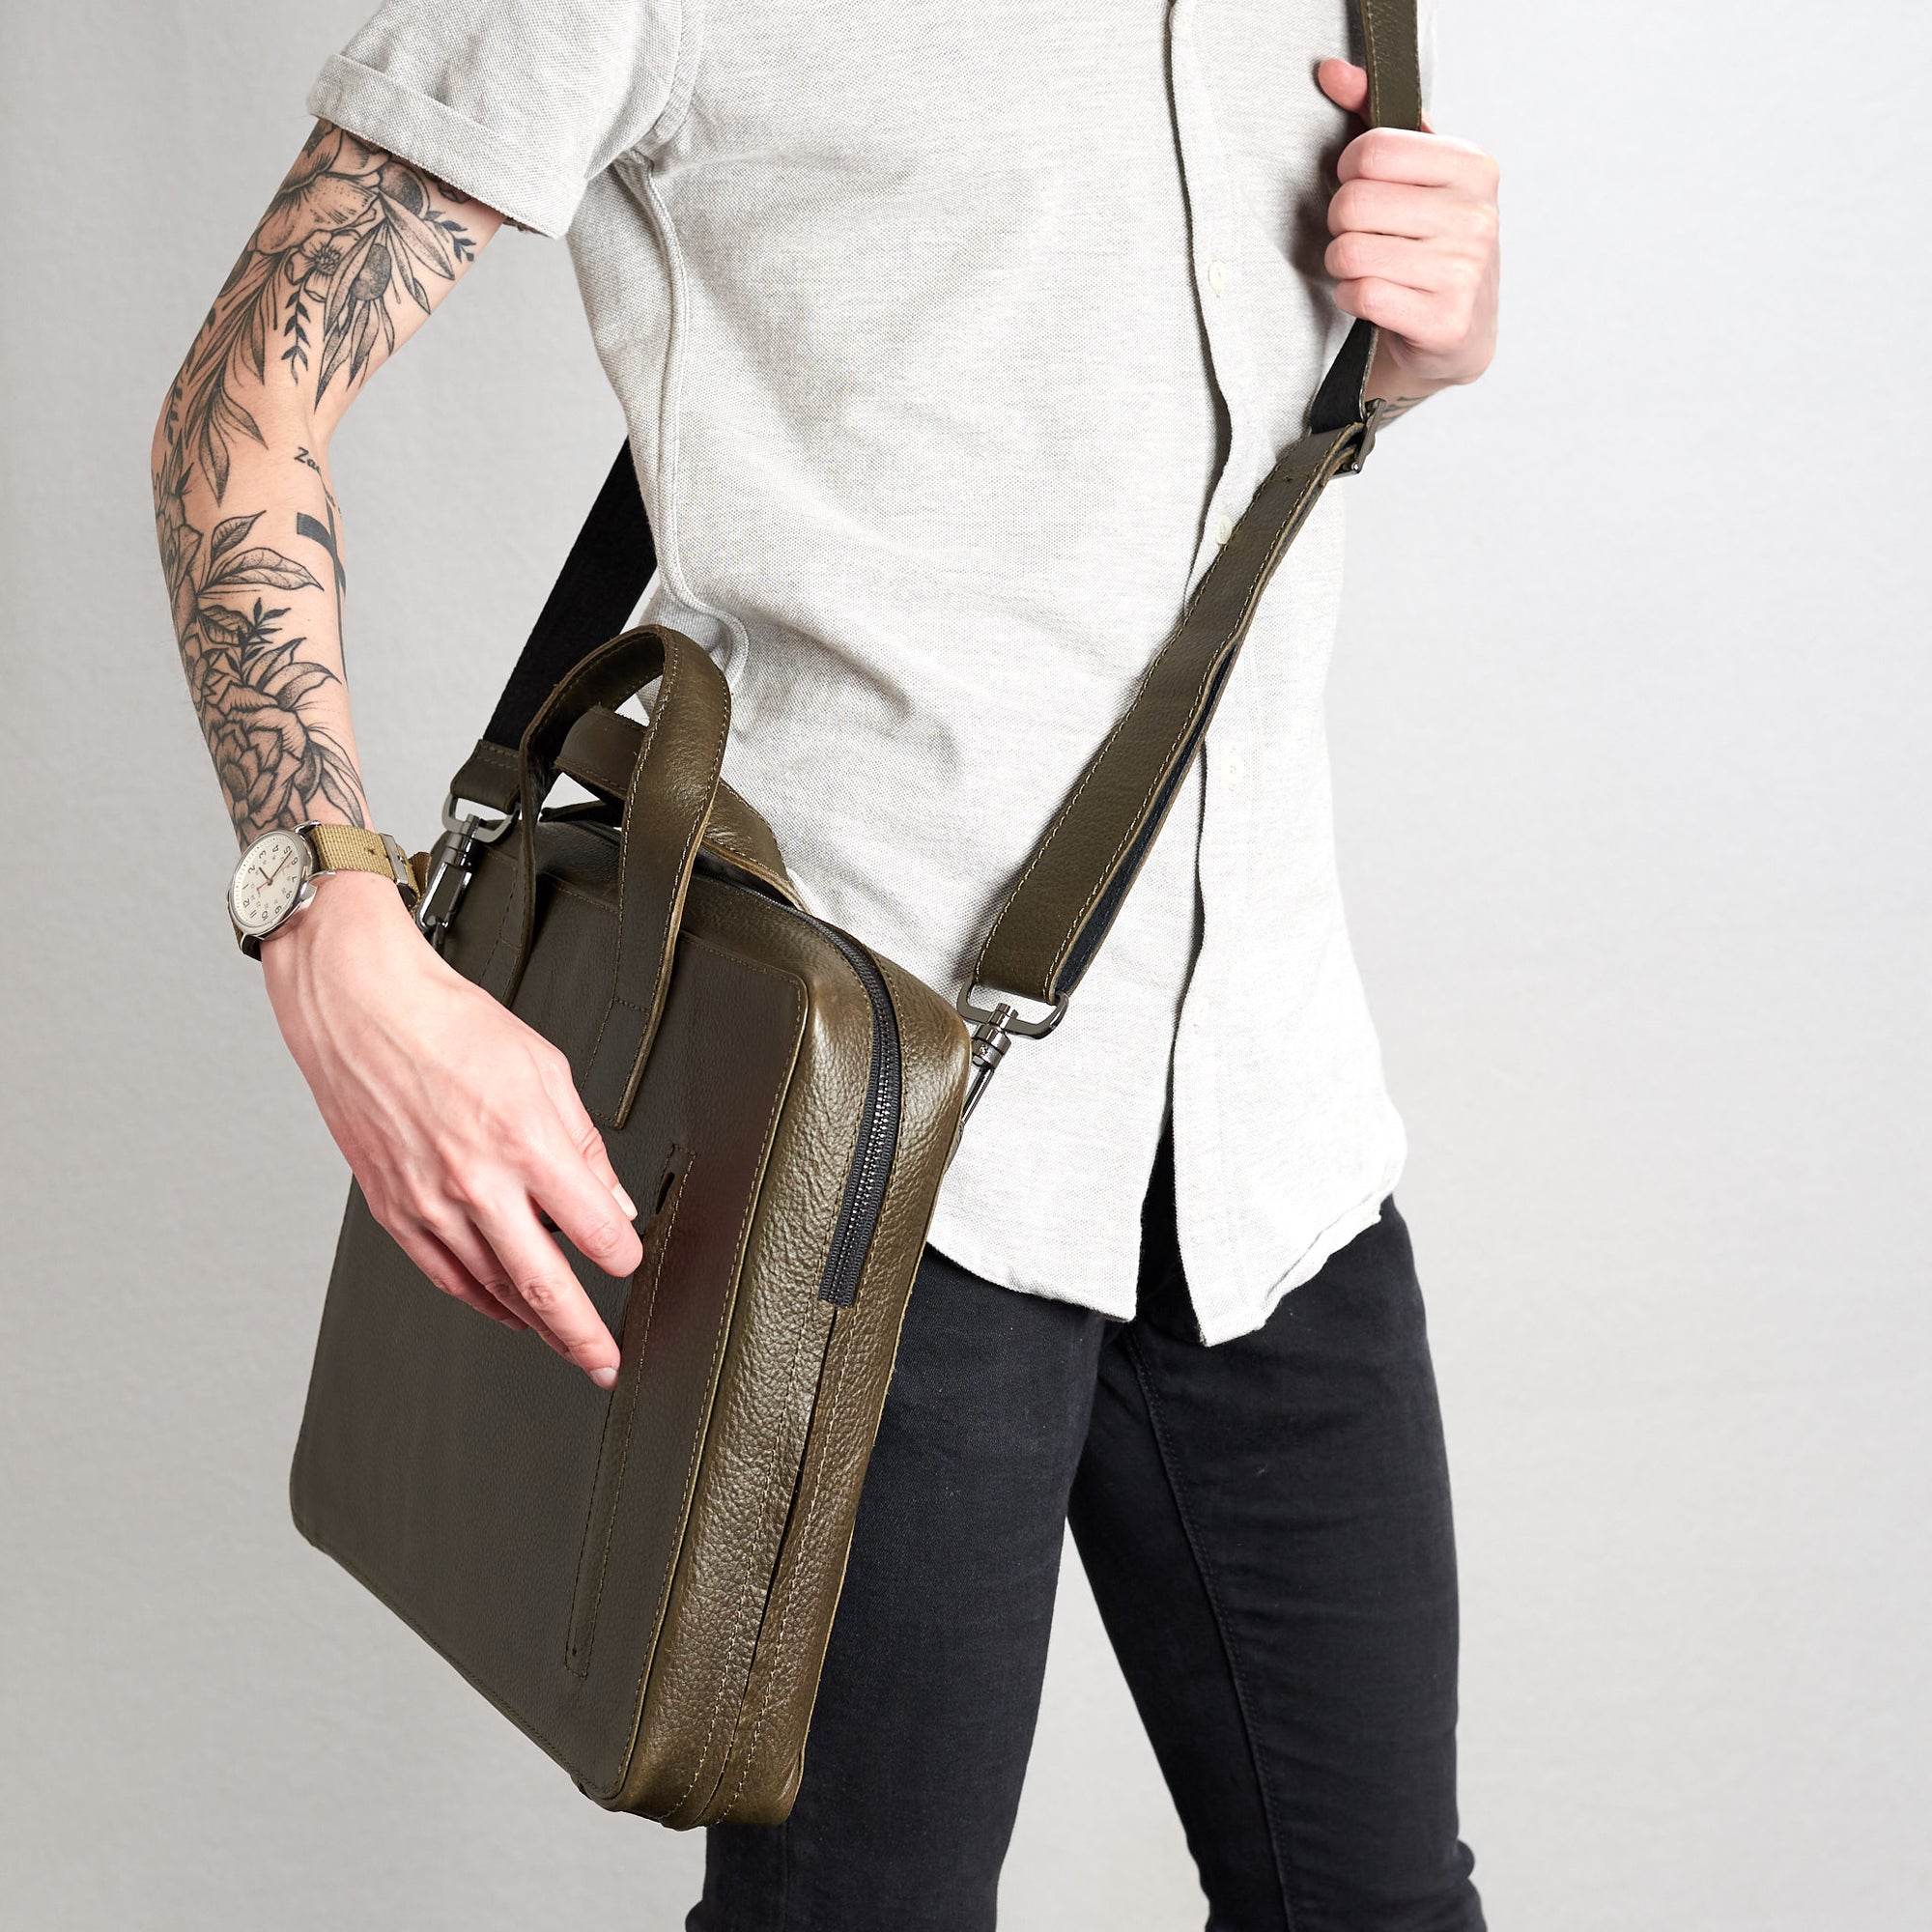 Shoulder strap in use. Roko briefcase style picture.